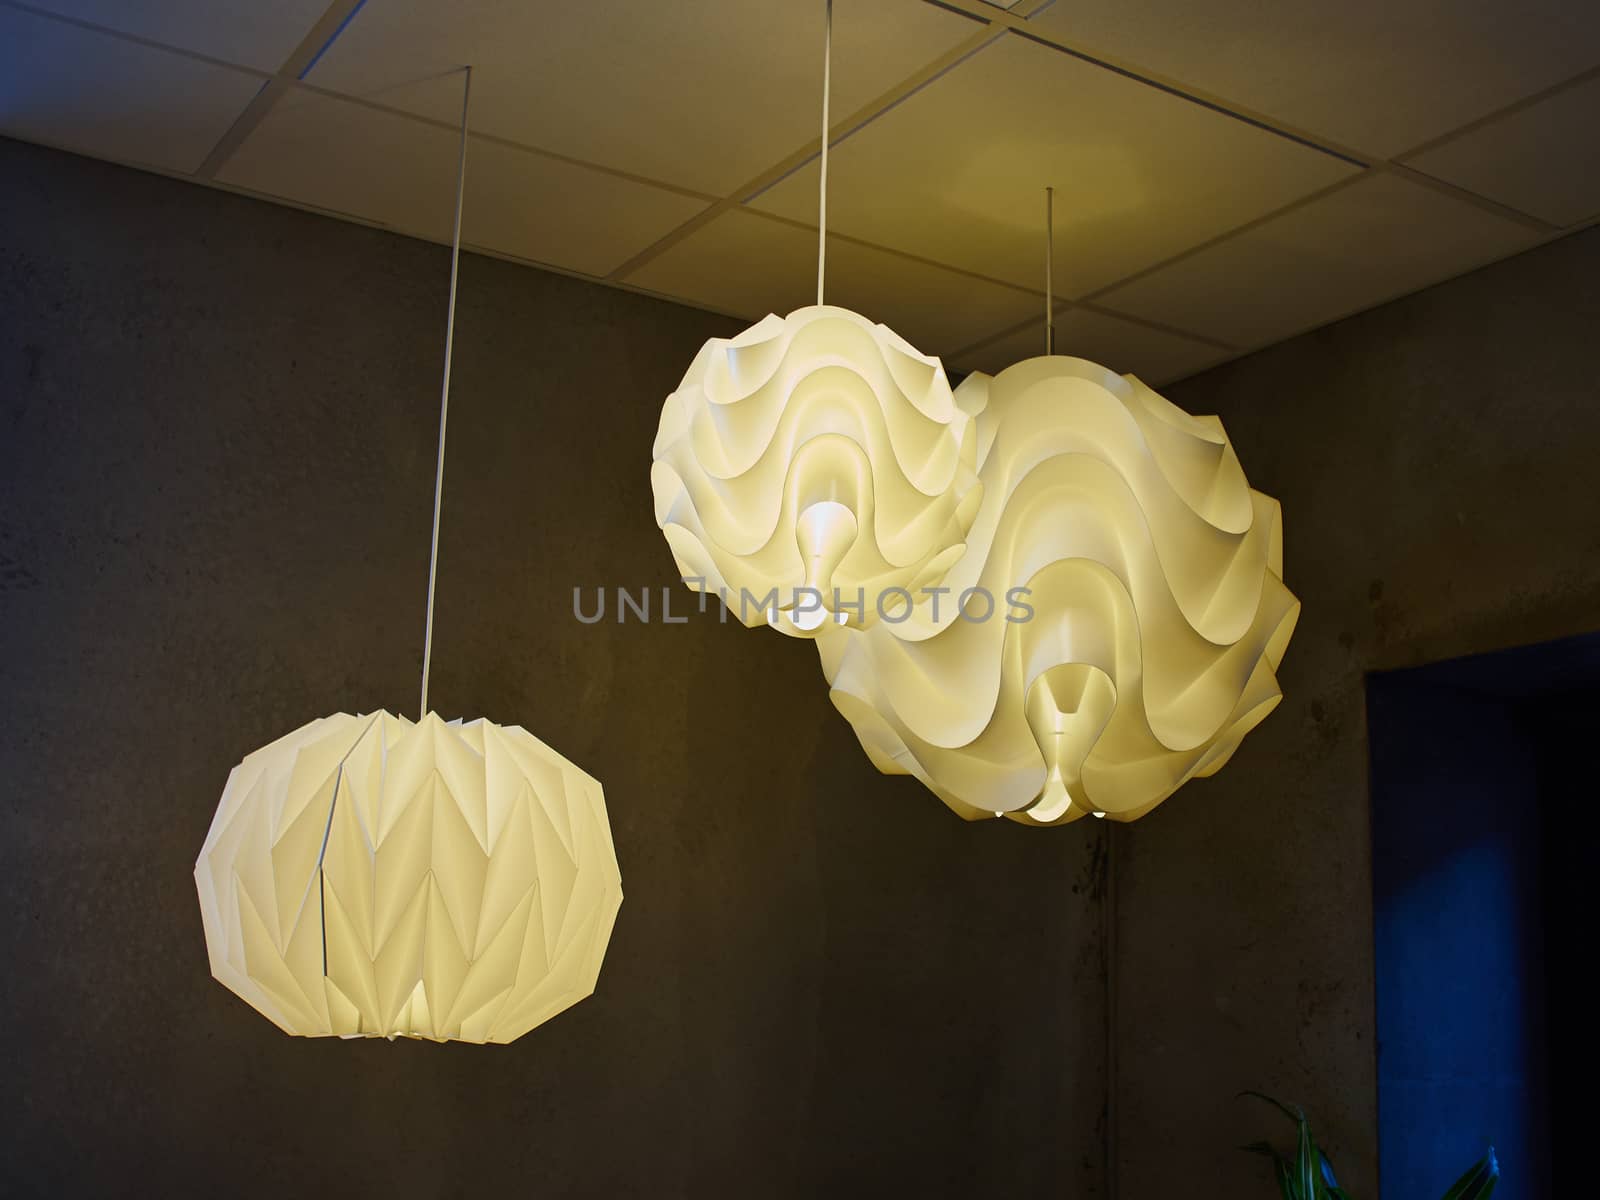 Modern design lamp made out of white parts creating special light effect